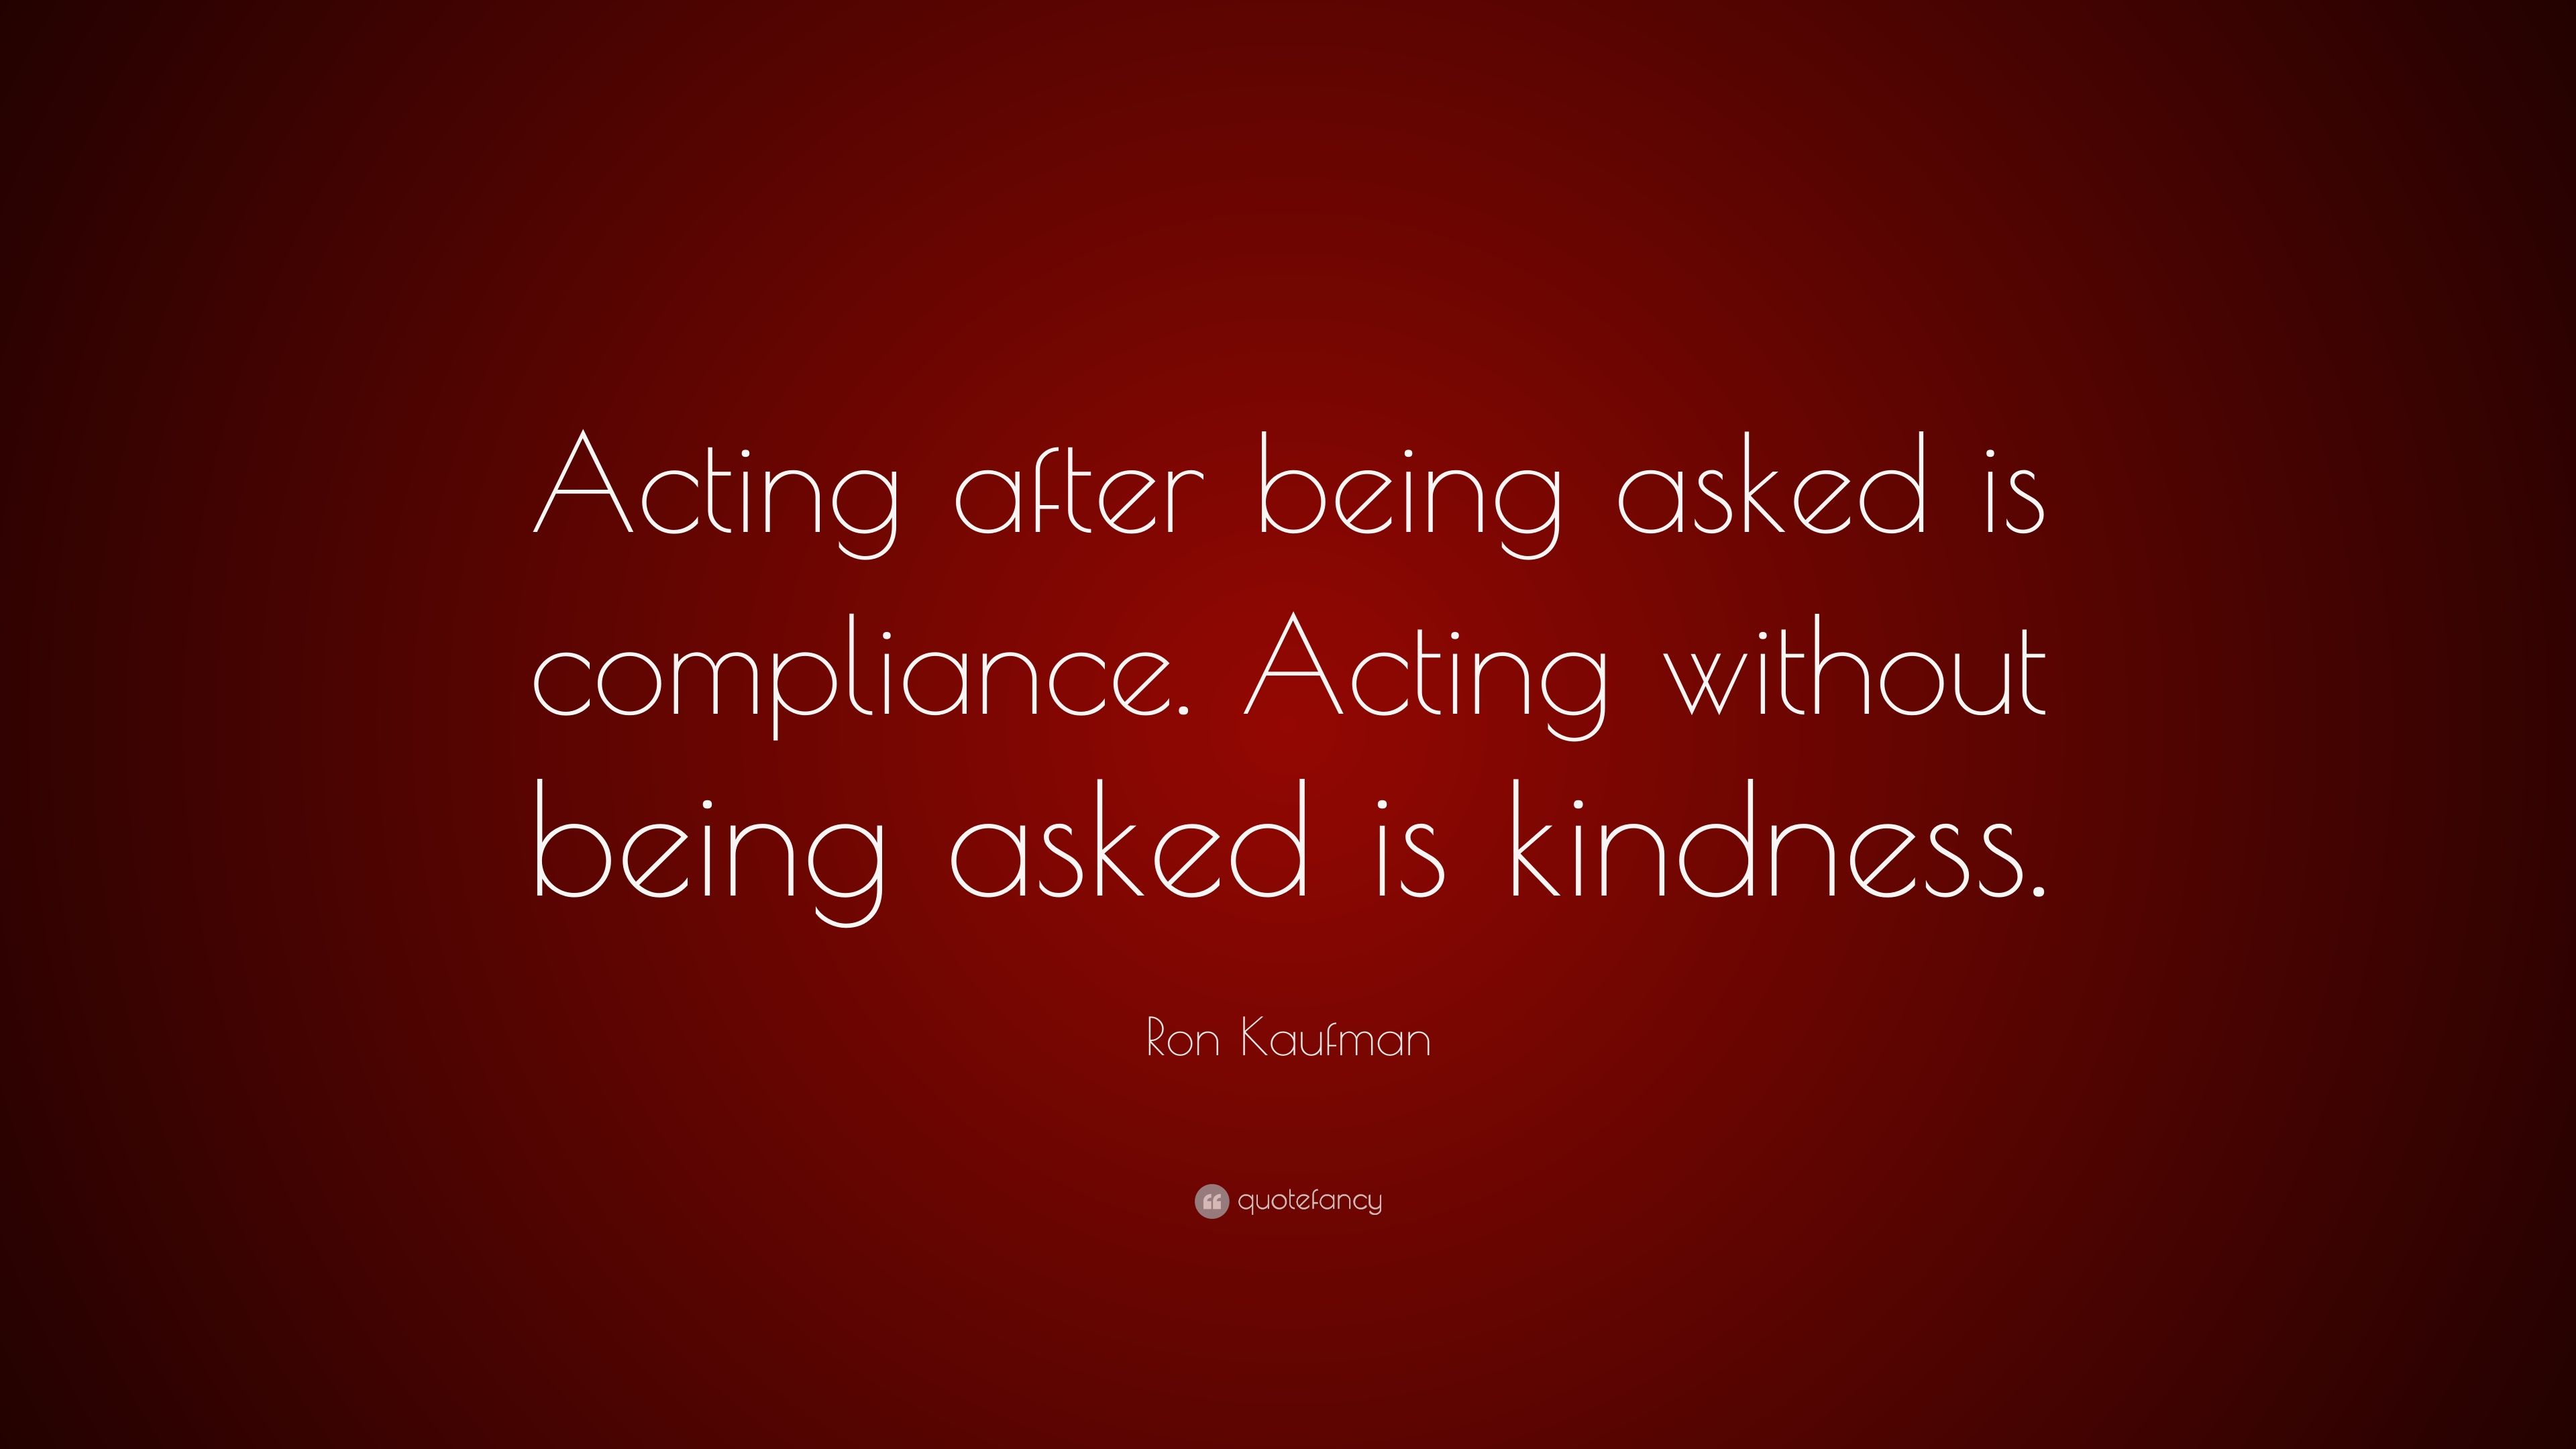 Ron Kaufman Quote: “Acting after being asked is compliance. Acting